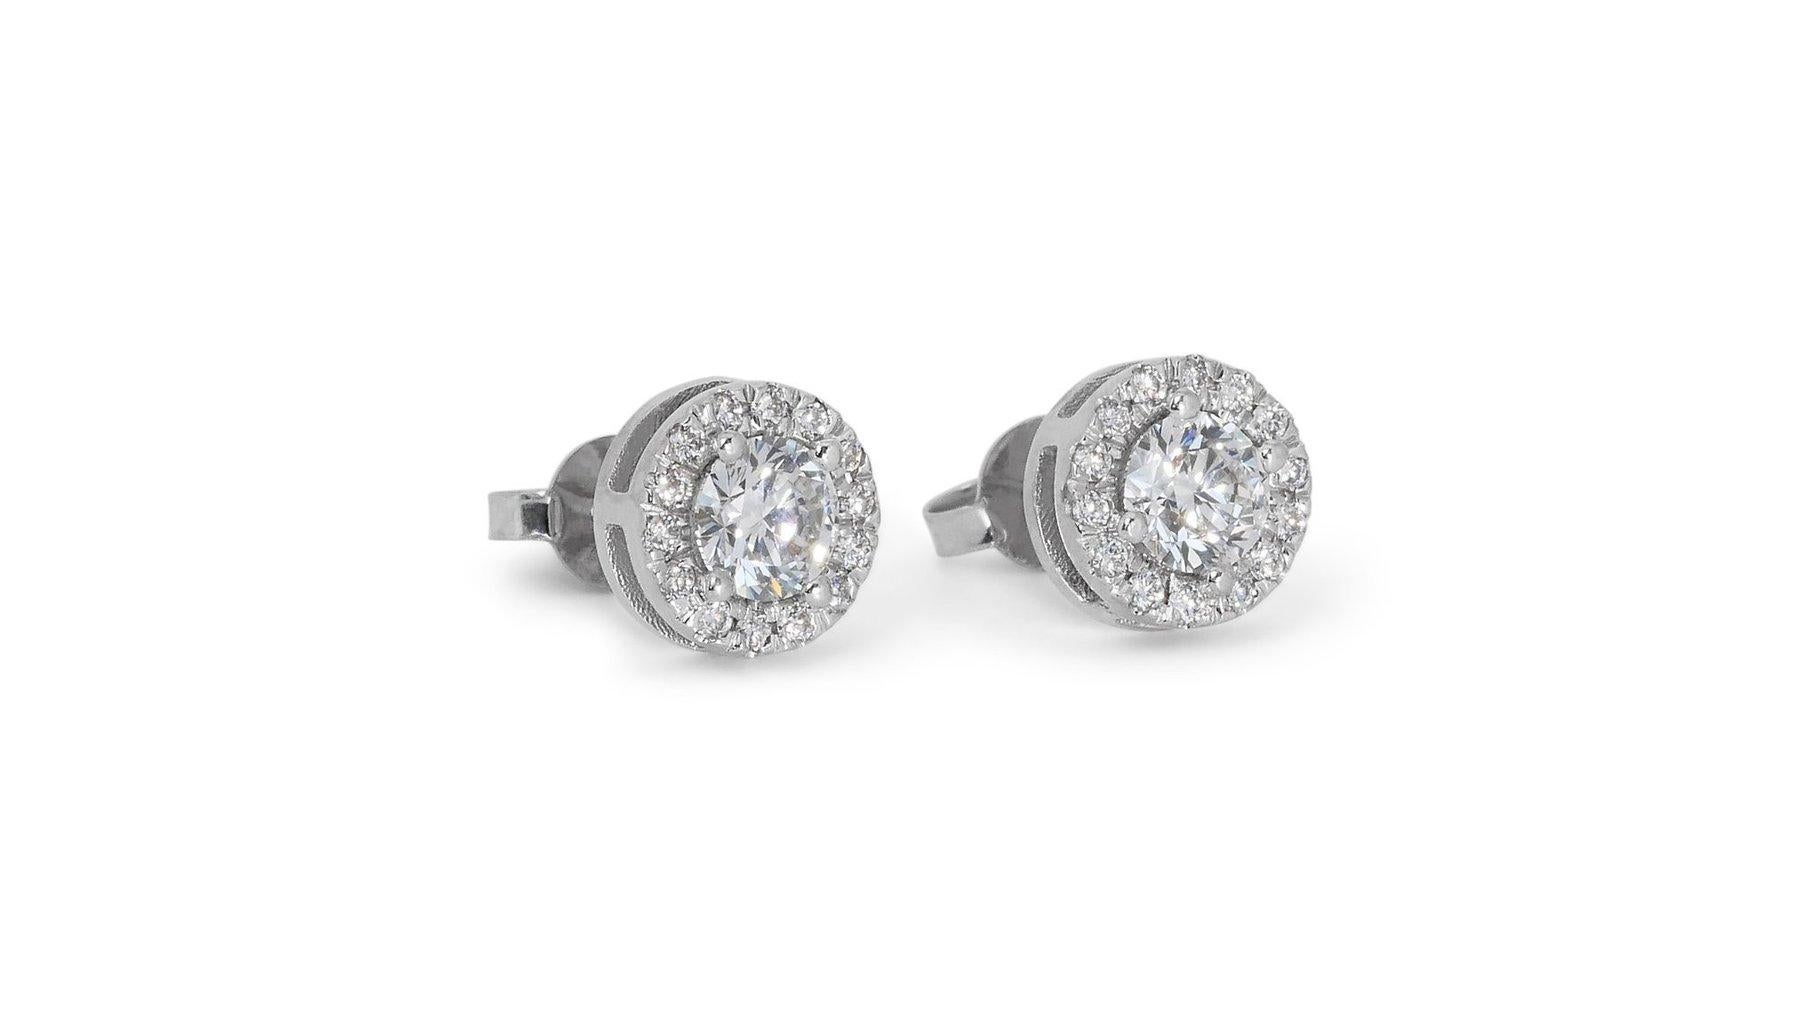 Dazzling 1.45ct Diamond Stud Earrings in 18k White Gold - GIA Certified

These stunning stud earrings in 18k white gold epitomize luxury and elegance, with a total carat weight of 1.20. Complementing the main stones, 28 additional round diamonds,